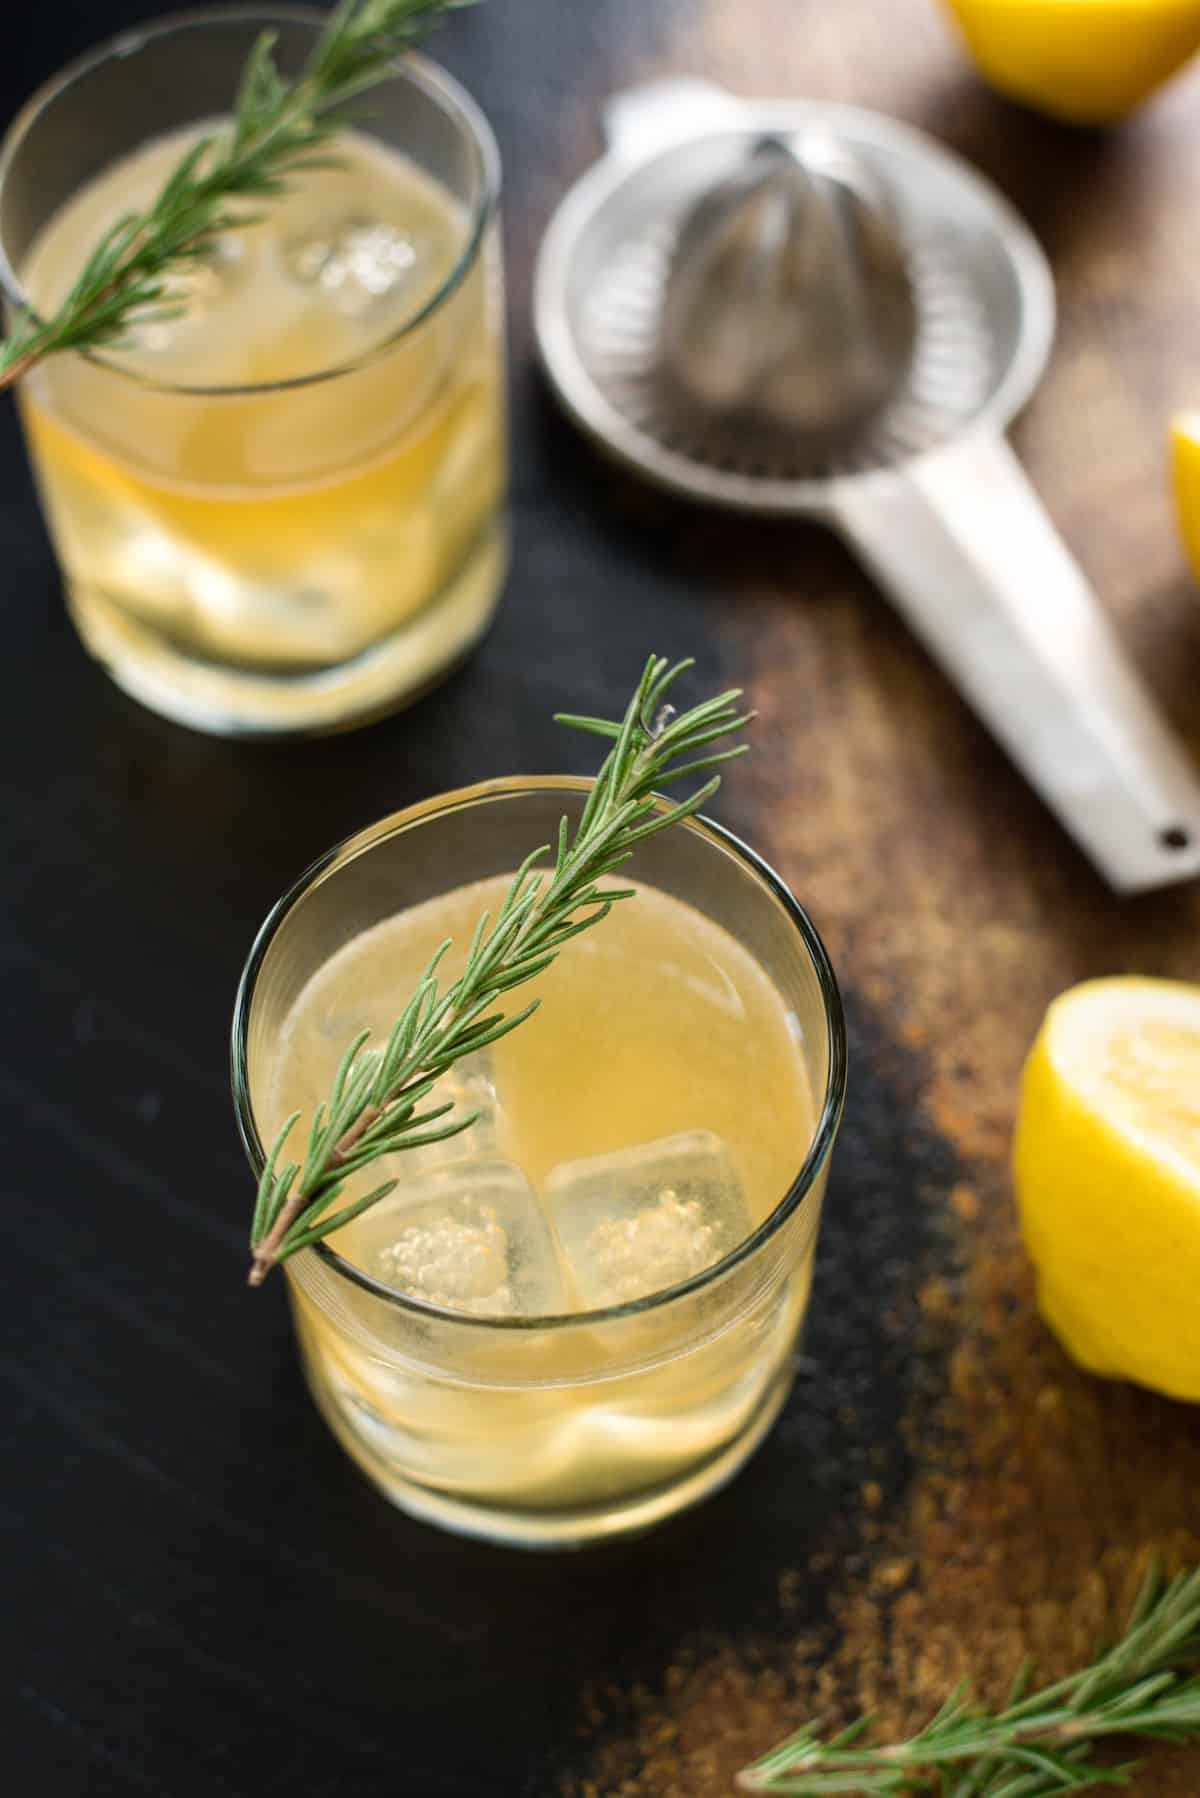 A glass filled with a bourbon lemon cocktail garnished with a rosemary sprig.